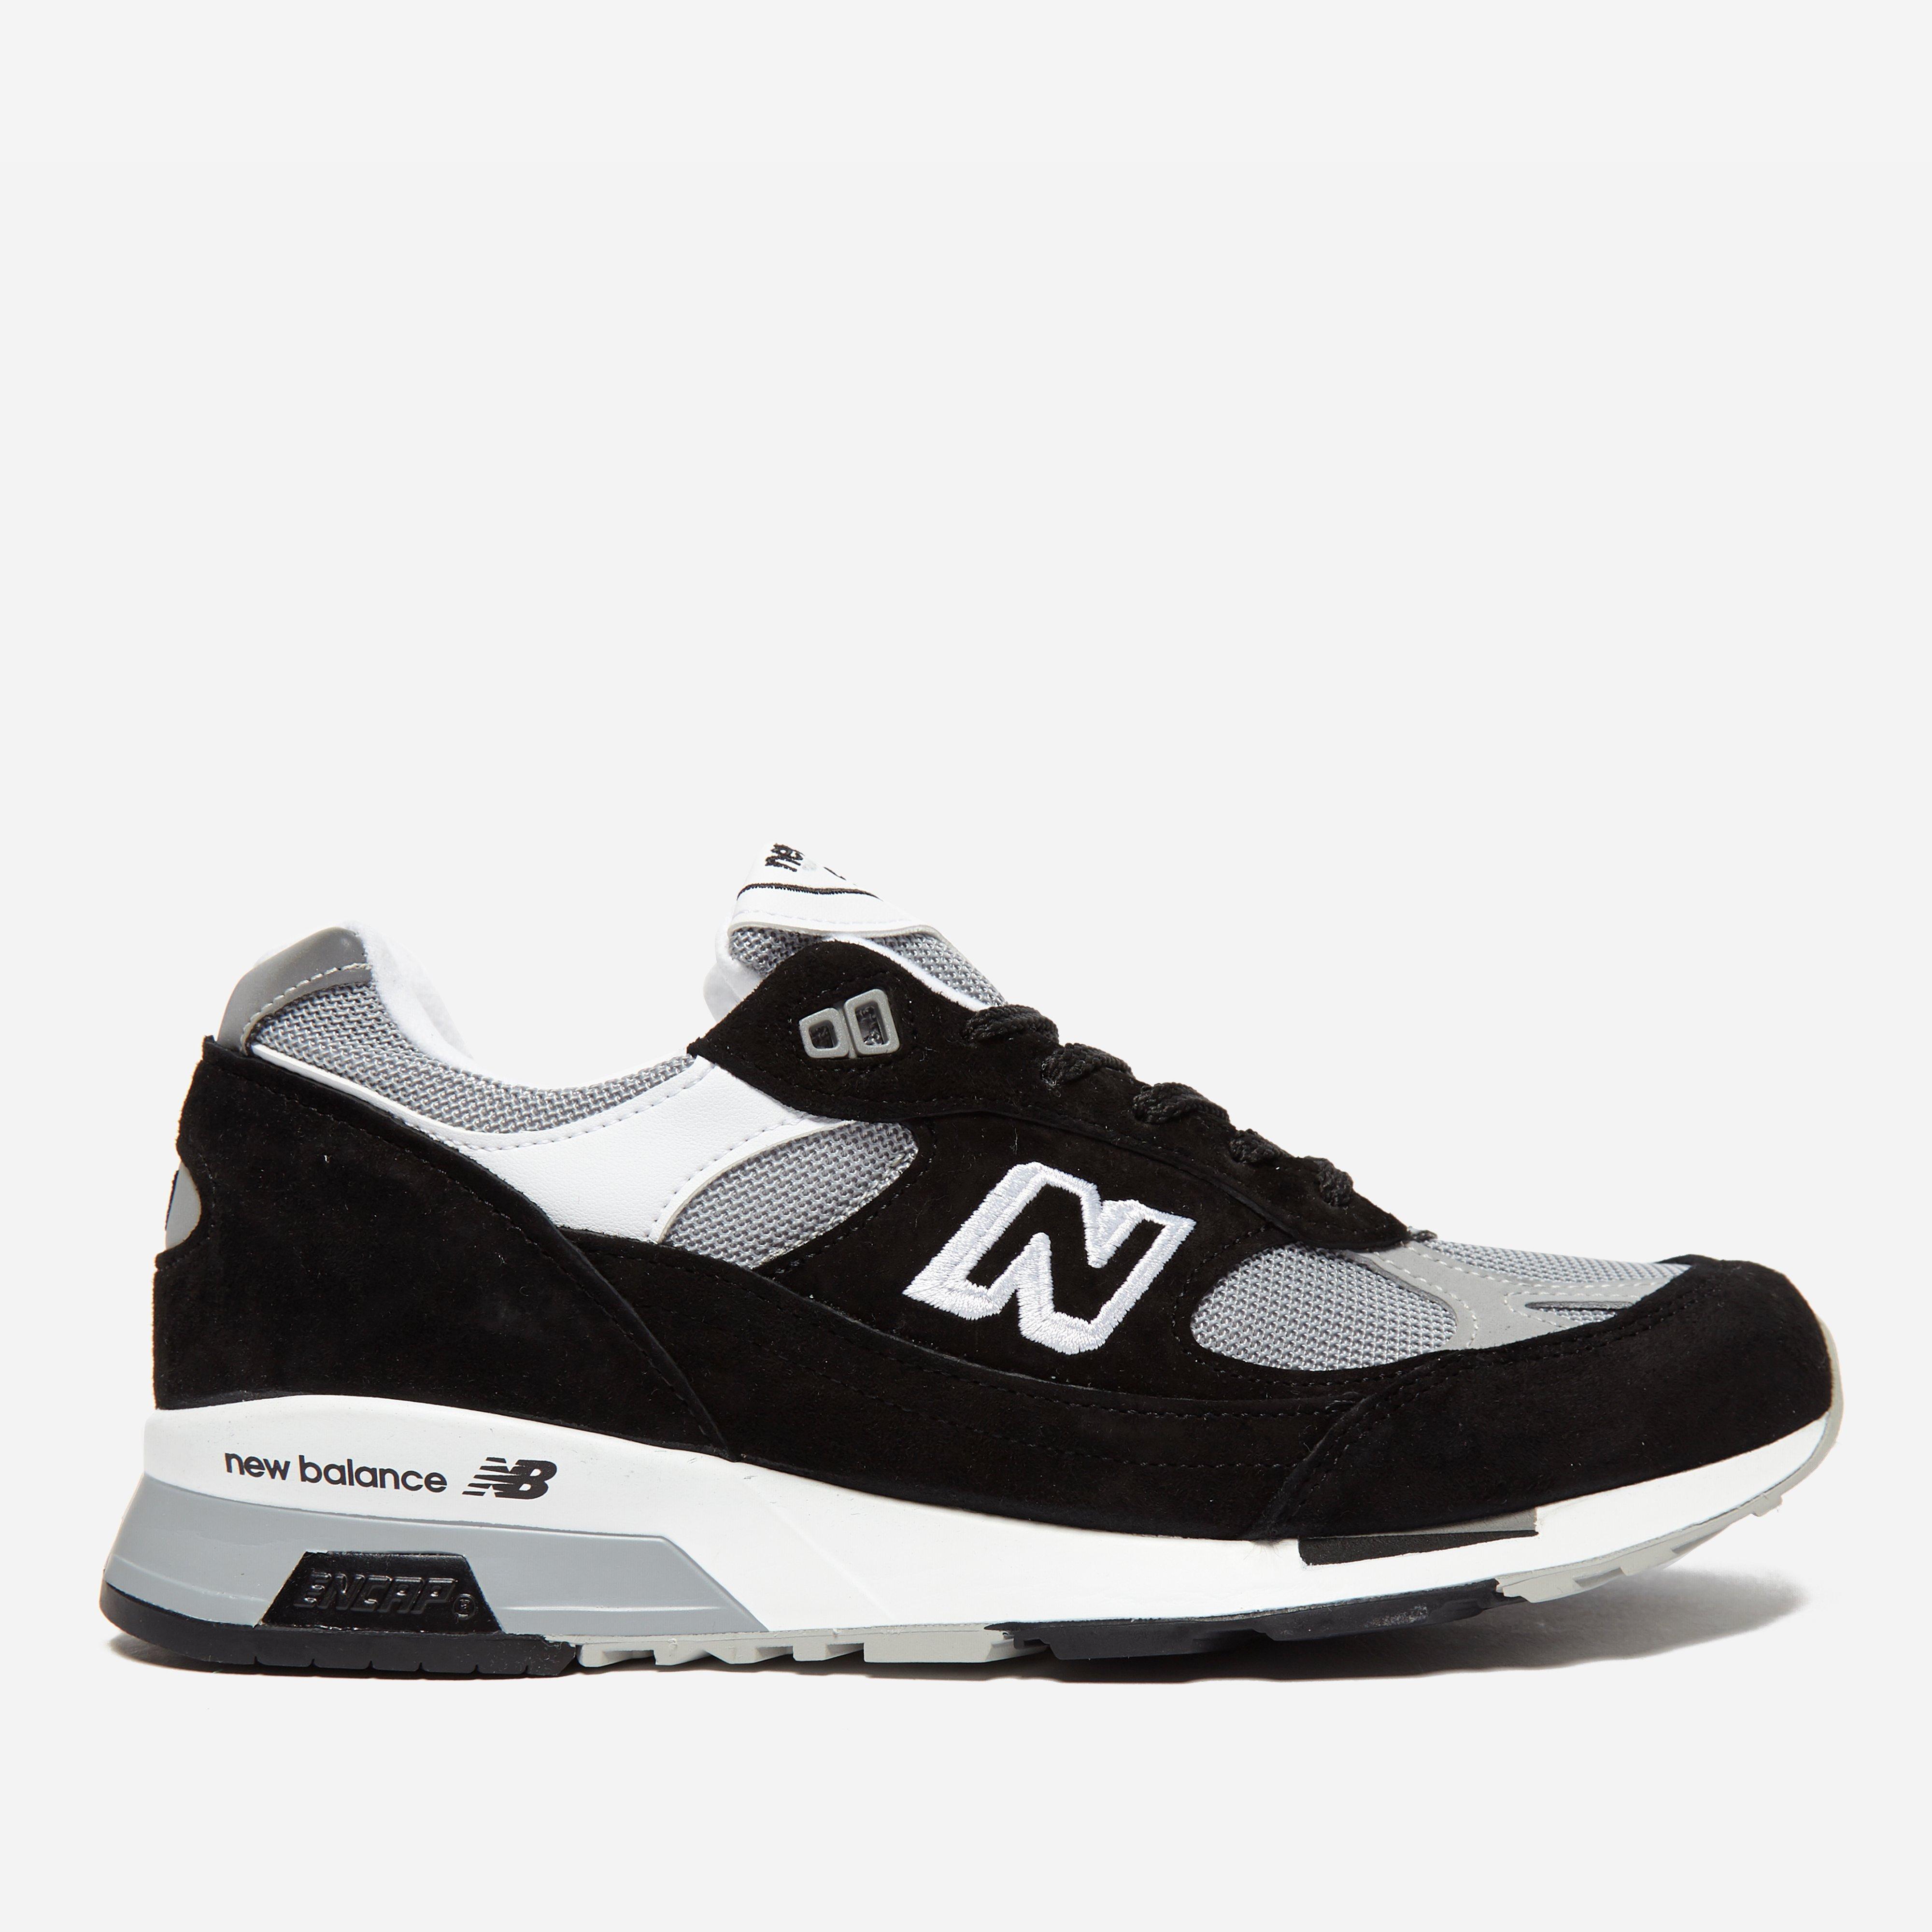 Lyst - New Balance M 991.5 Bb '991 / 1500' Made In England in Black for Men